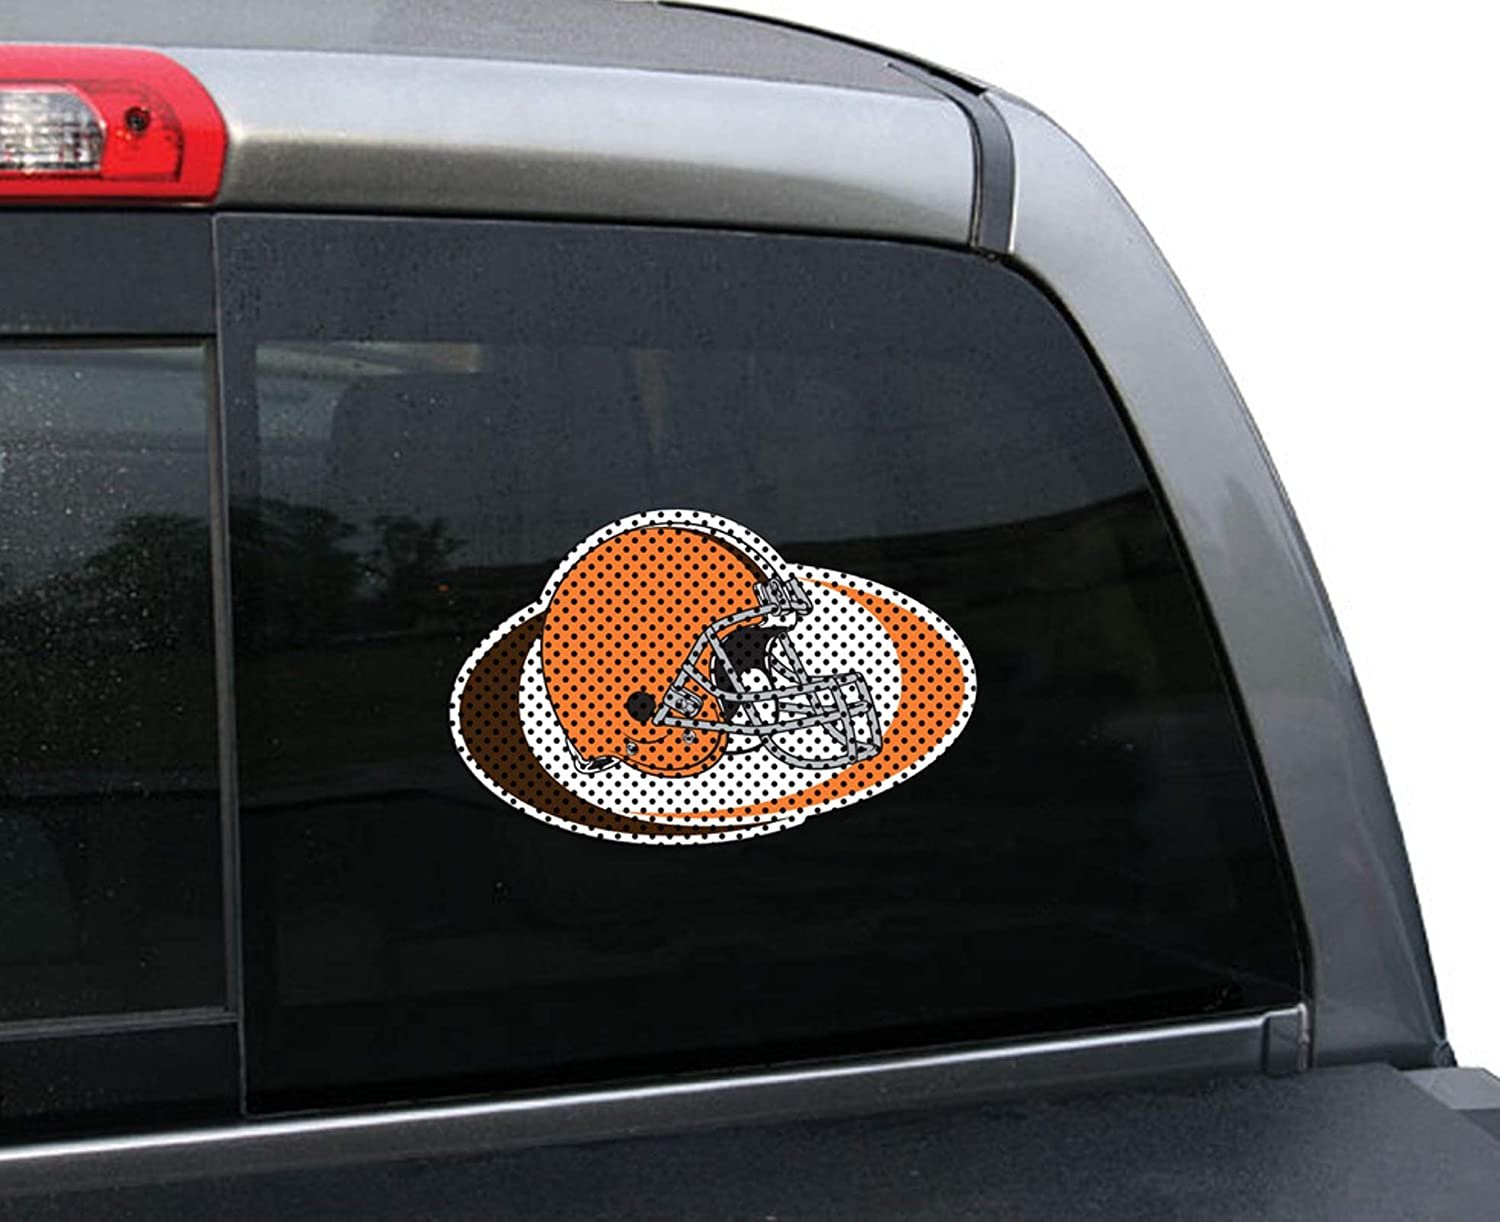 Cleveland Browns 8 Inch Preforated Window Film Decal Sticker, One-Way Vision, Adhesive Backing